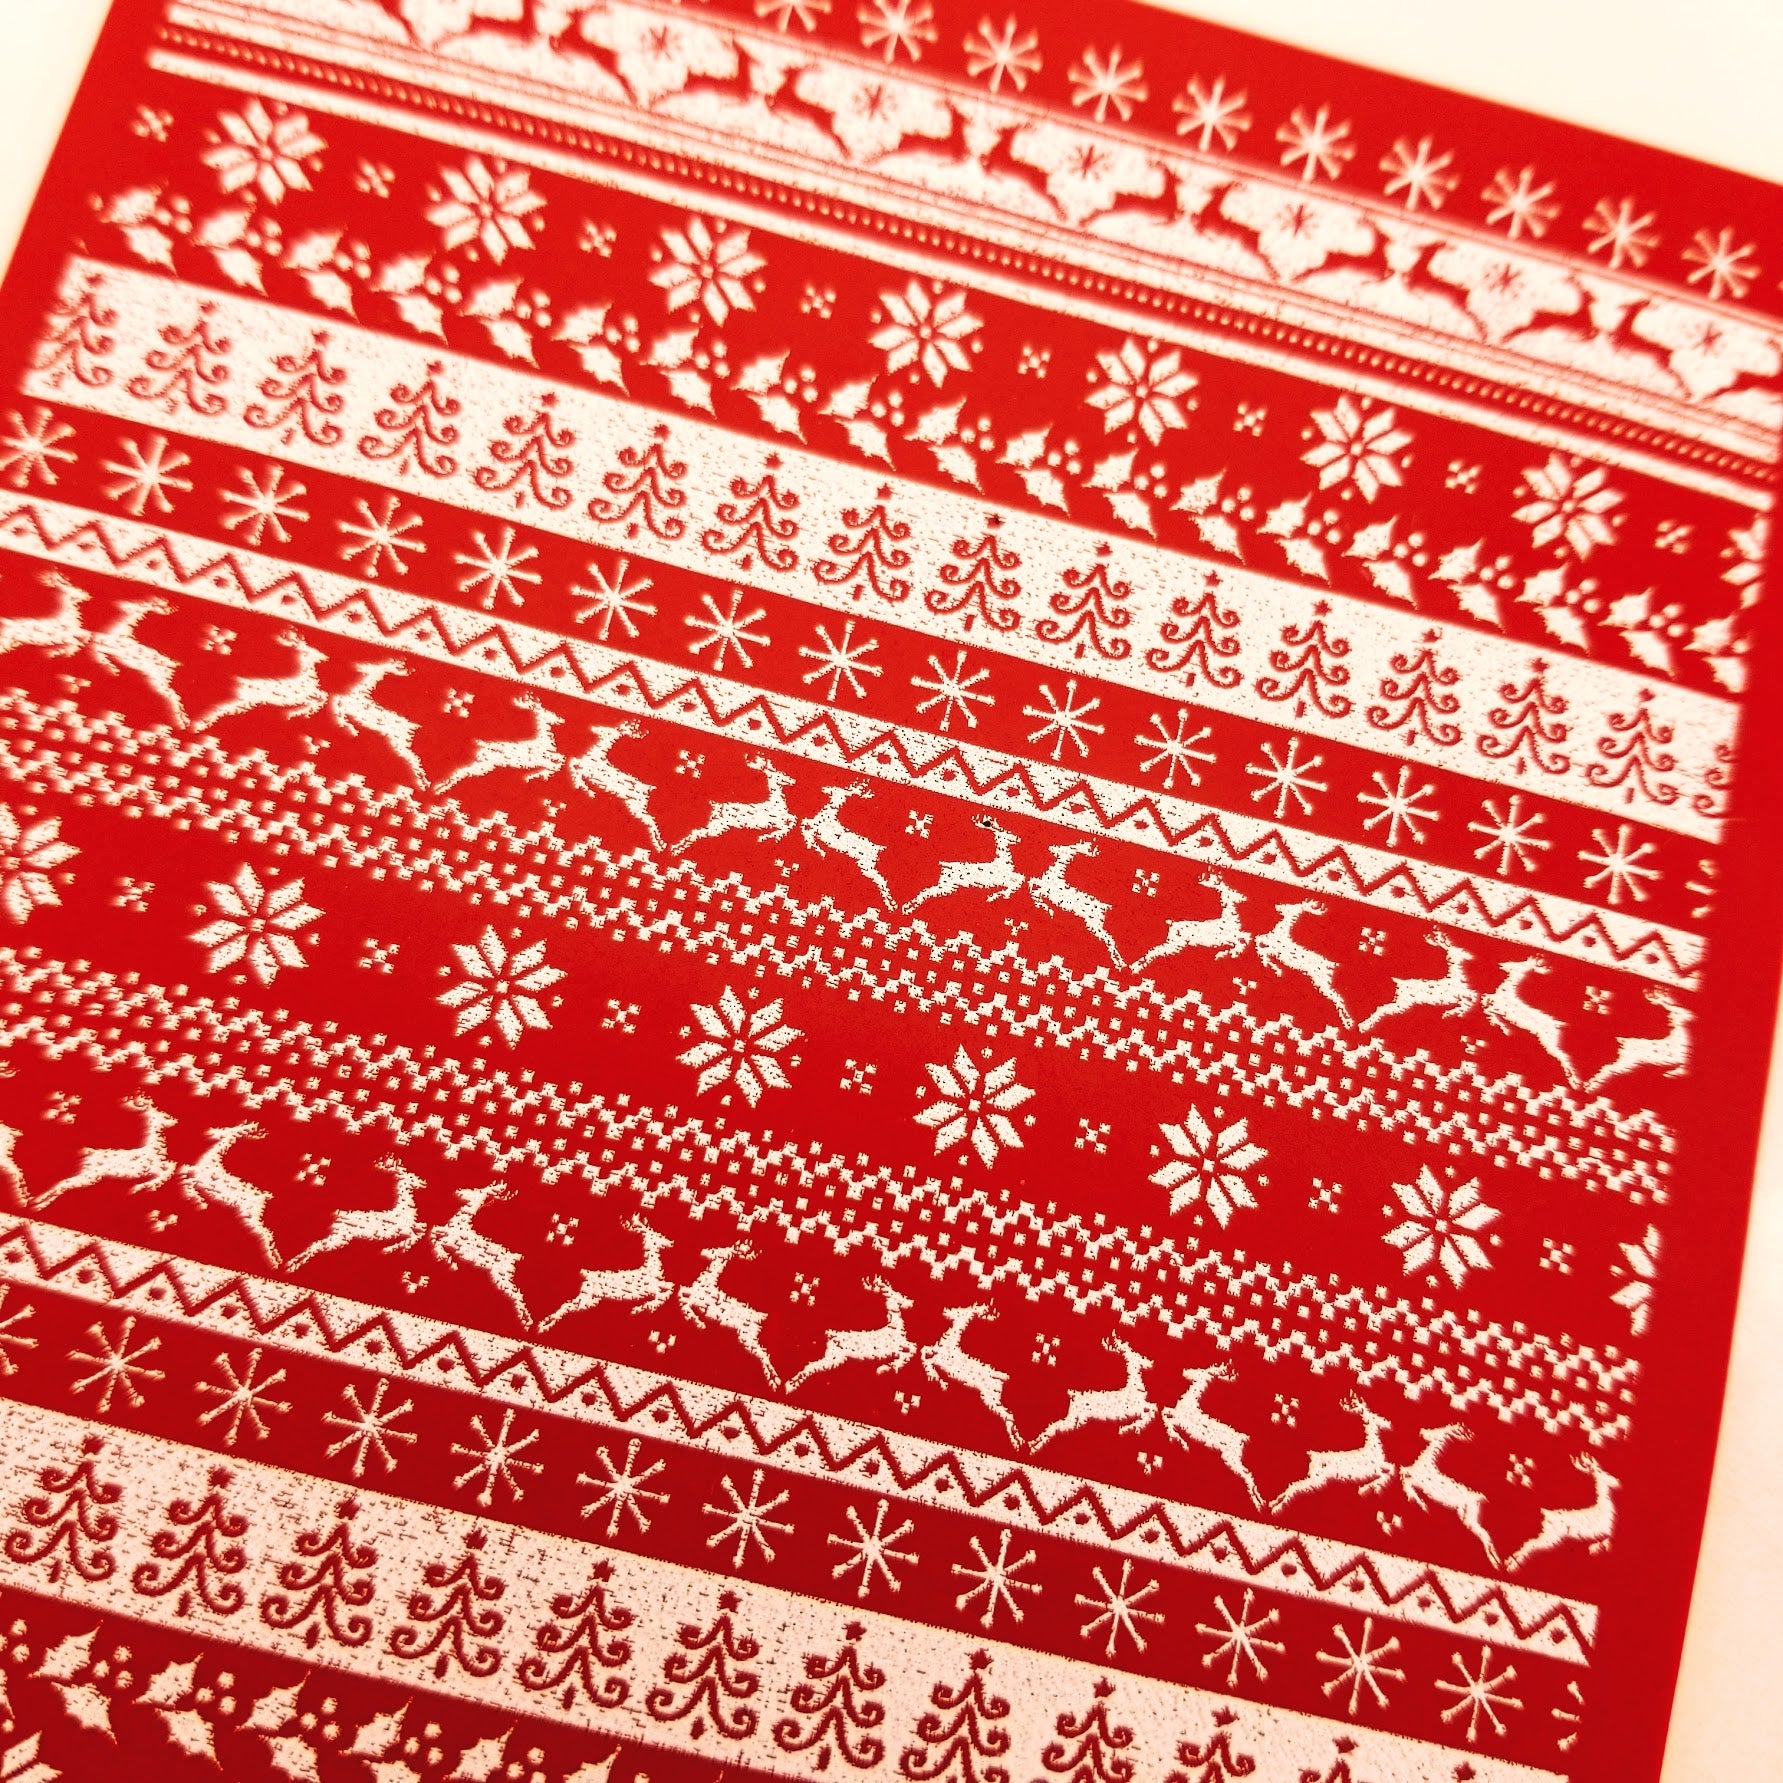 Christmas Knits Details Pattern Silkscreen Clay Painting on Polymer Clay